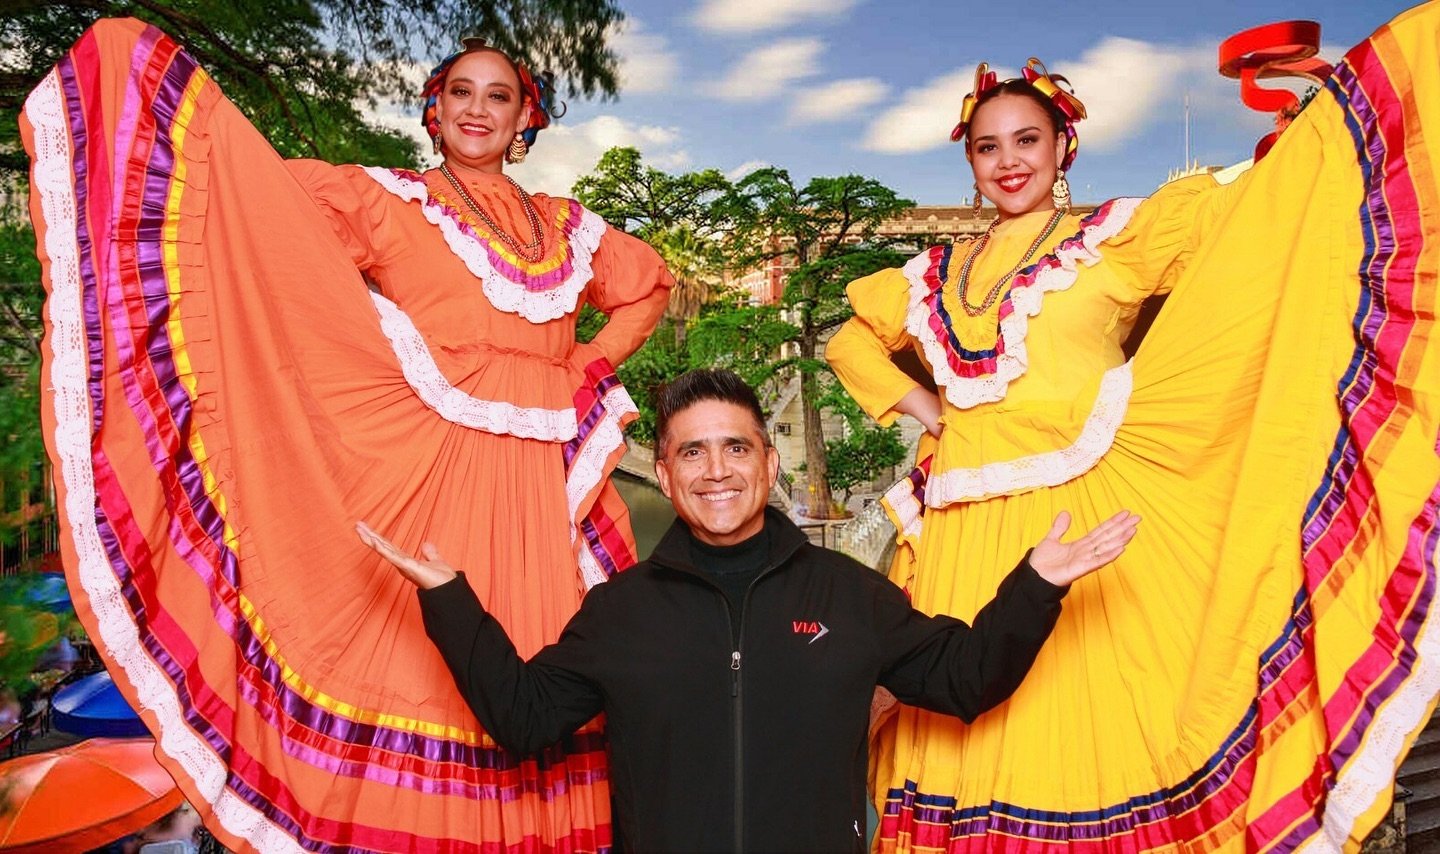 We&rsquo;re looking forward to celebrating with San Antonio for Fiesta 2024! 💃🏽🪅

What are your favorite events you&rsquo;ve been looking forward to all year long?! Maybe we&rsquo;ll see you there! 😉

Let us know in the comments below!

.
.
.

Sa